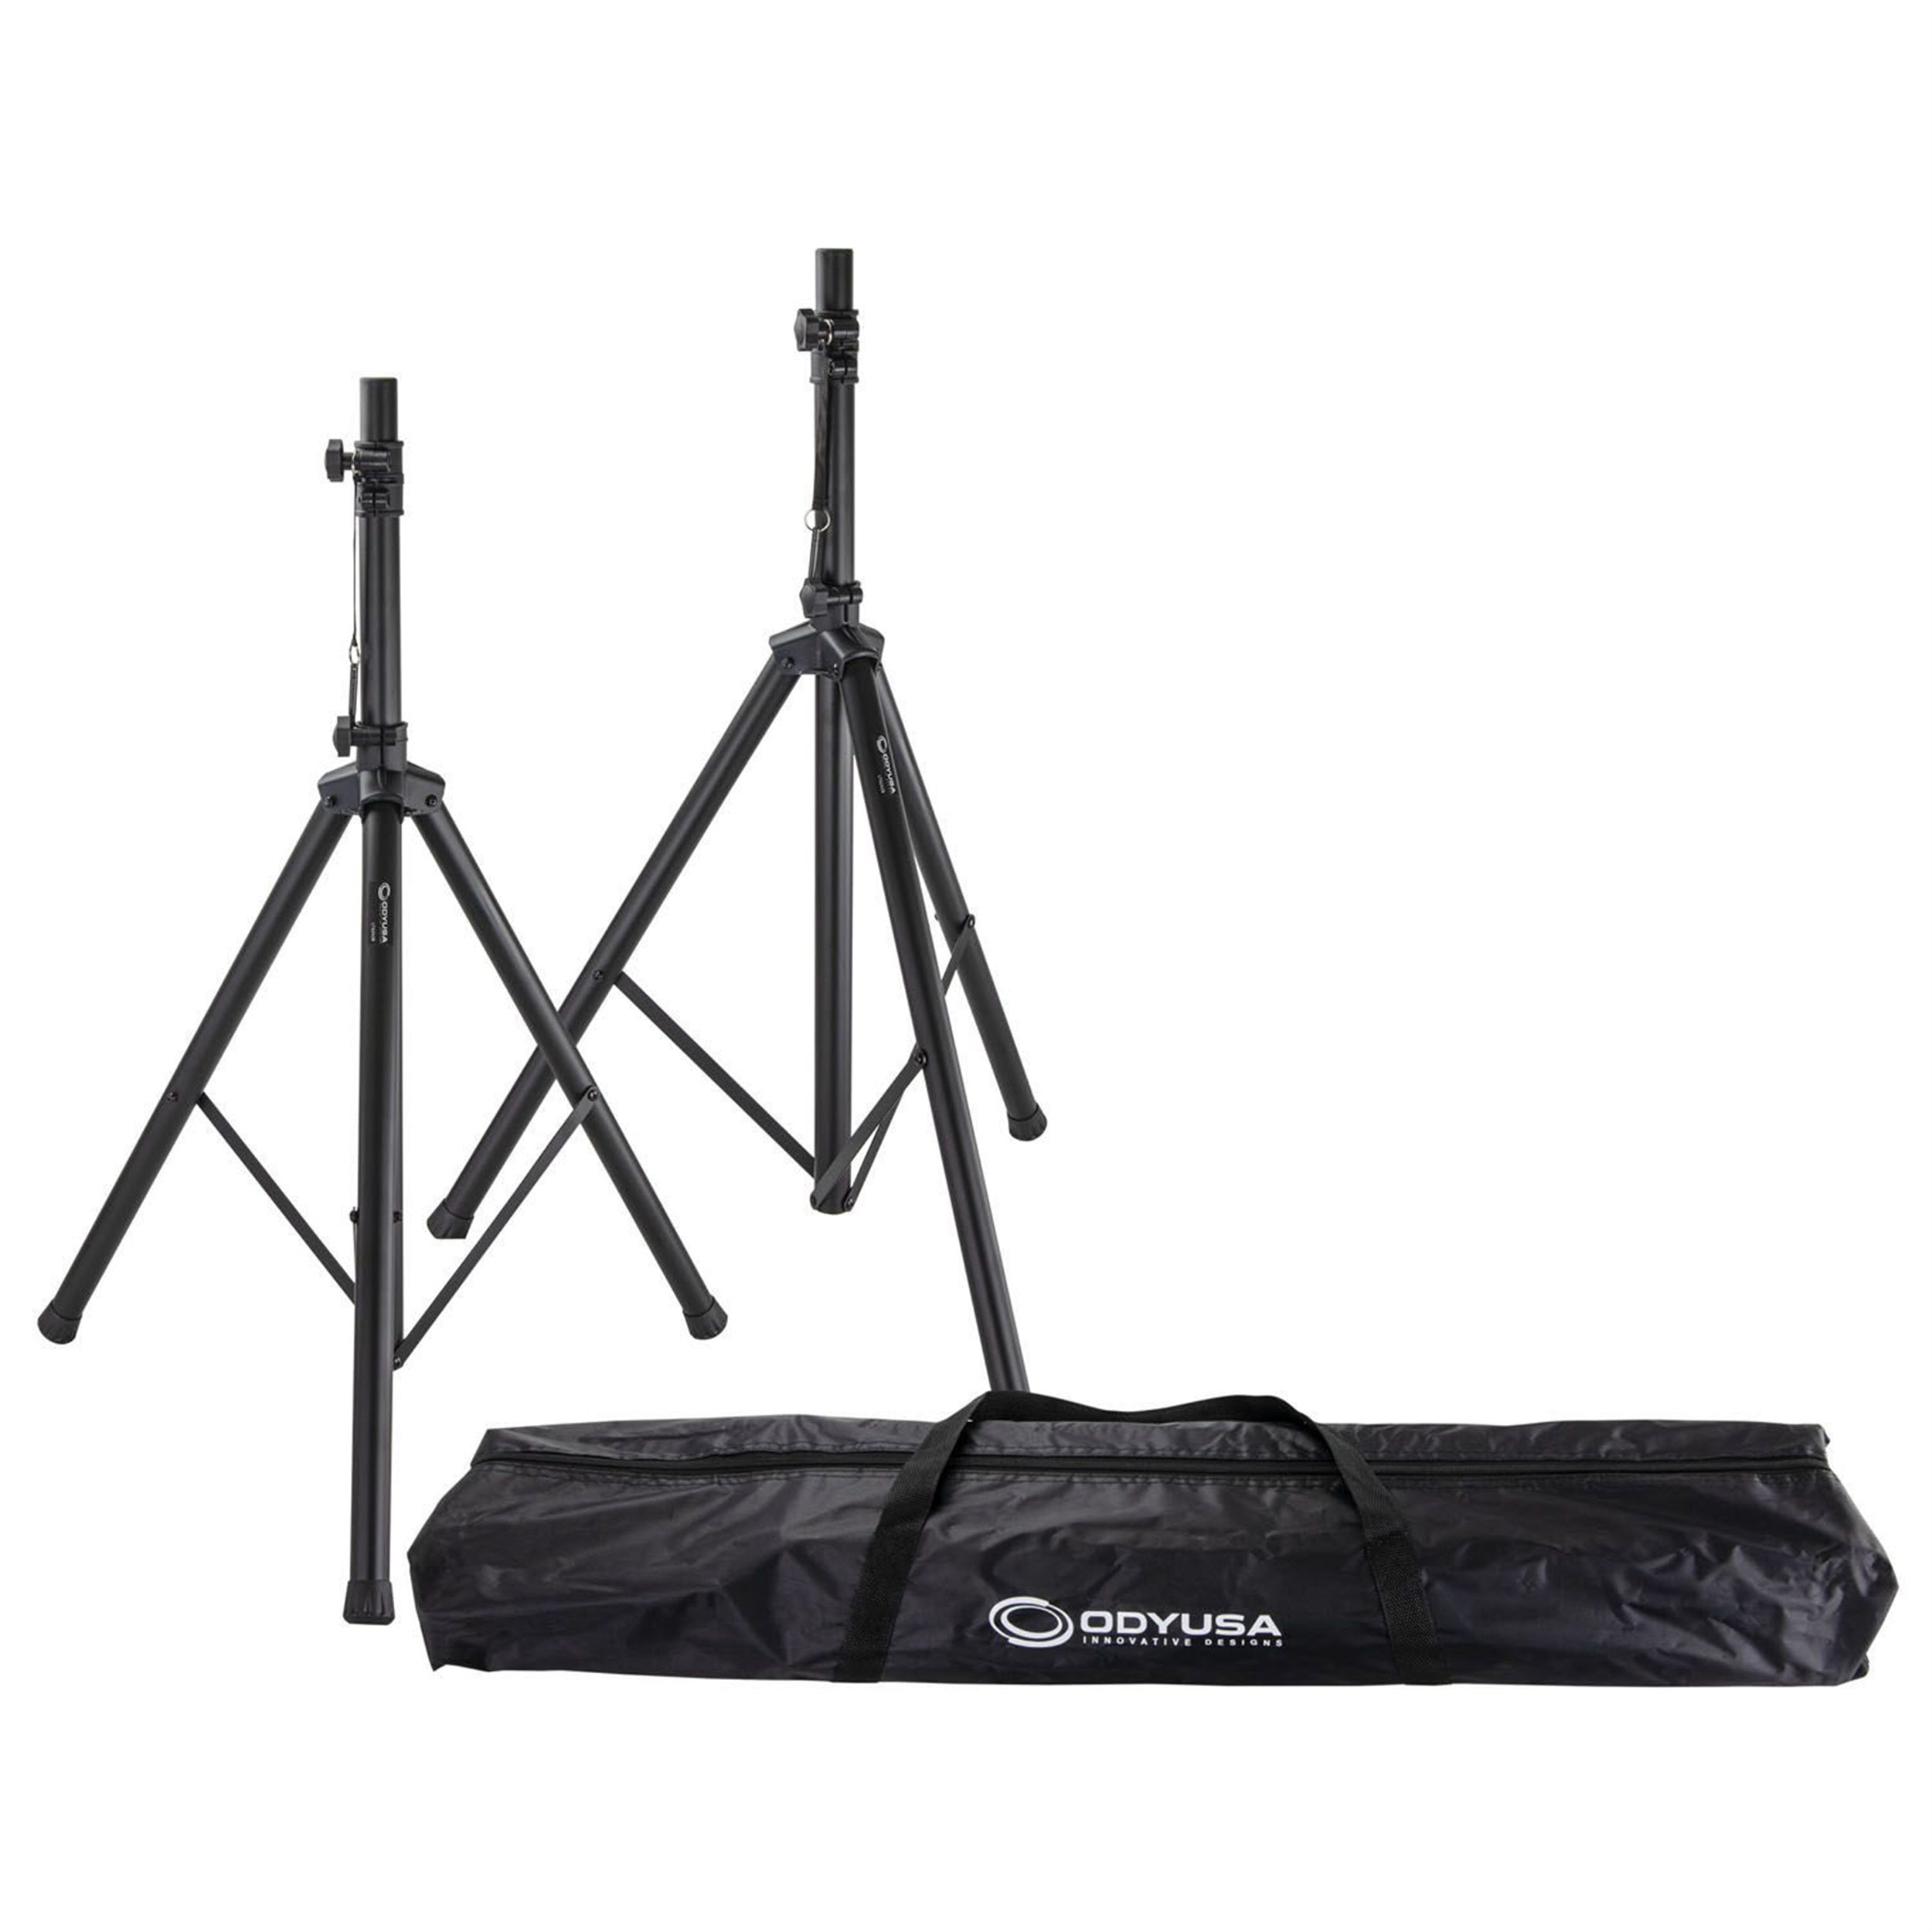 2x QSC K12.2 Speaker Package with Cables, Stands and Tote Bags Odyssey